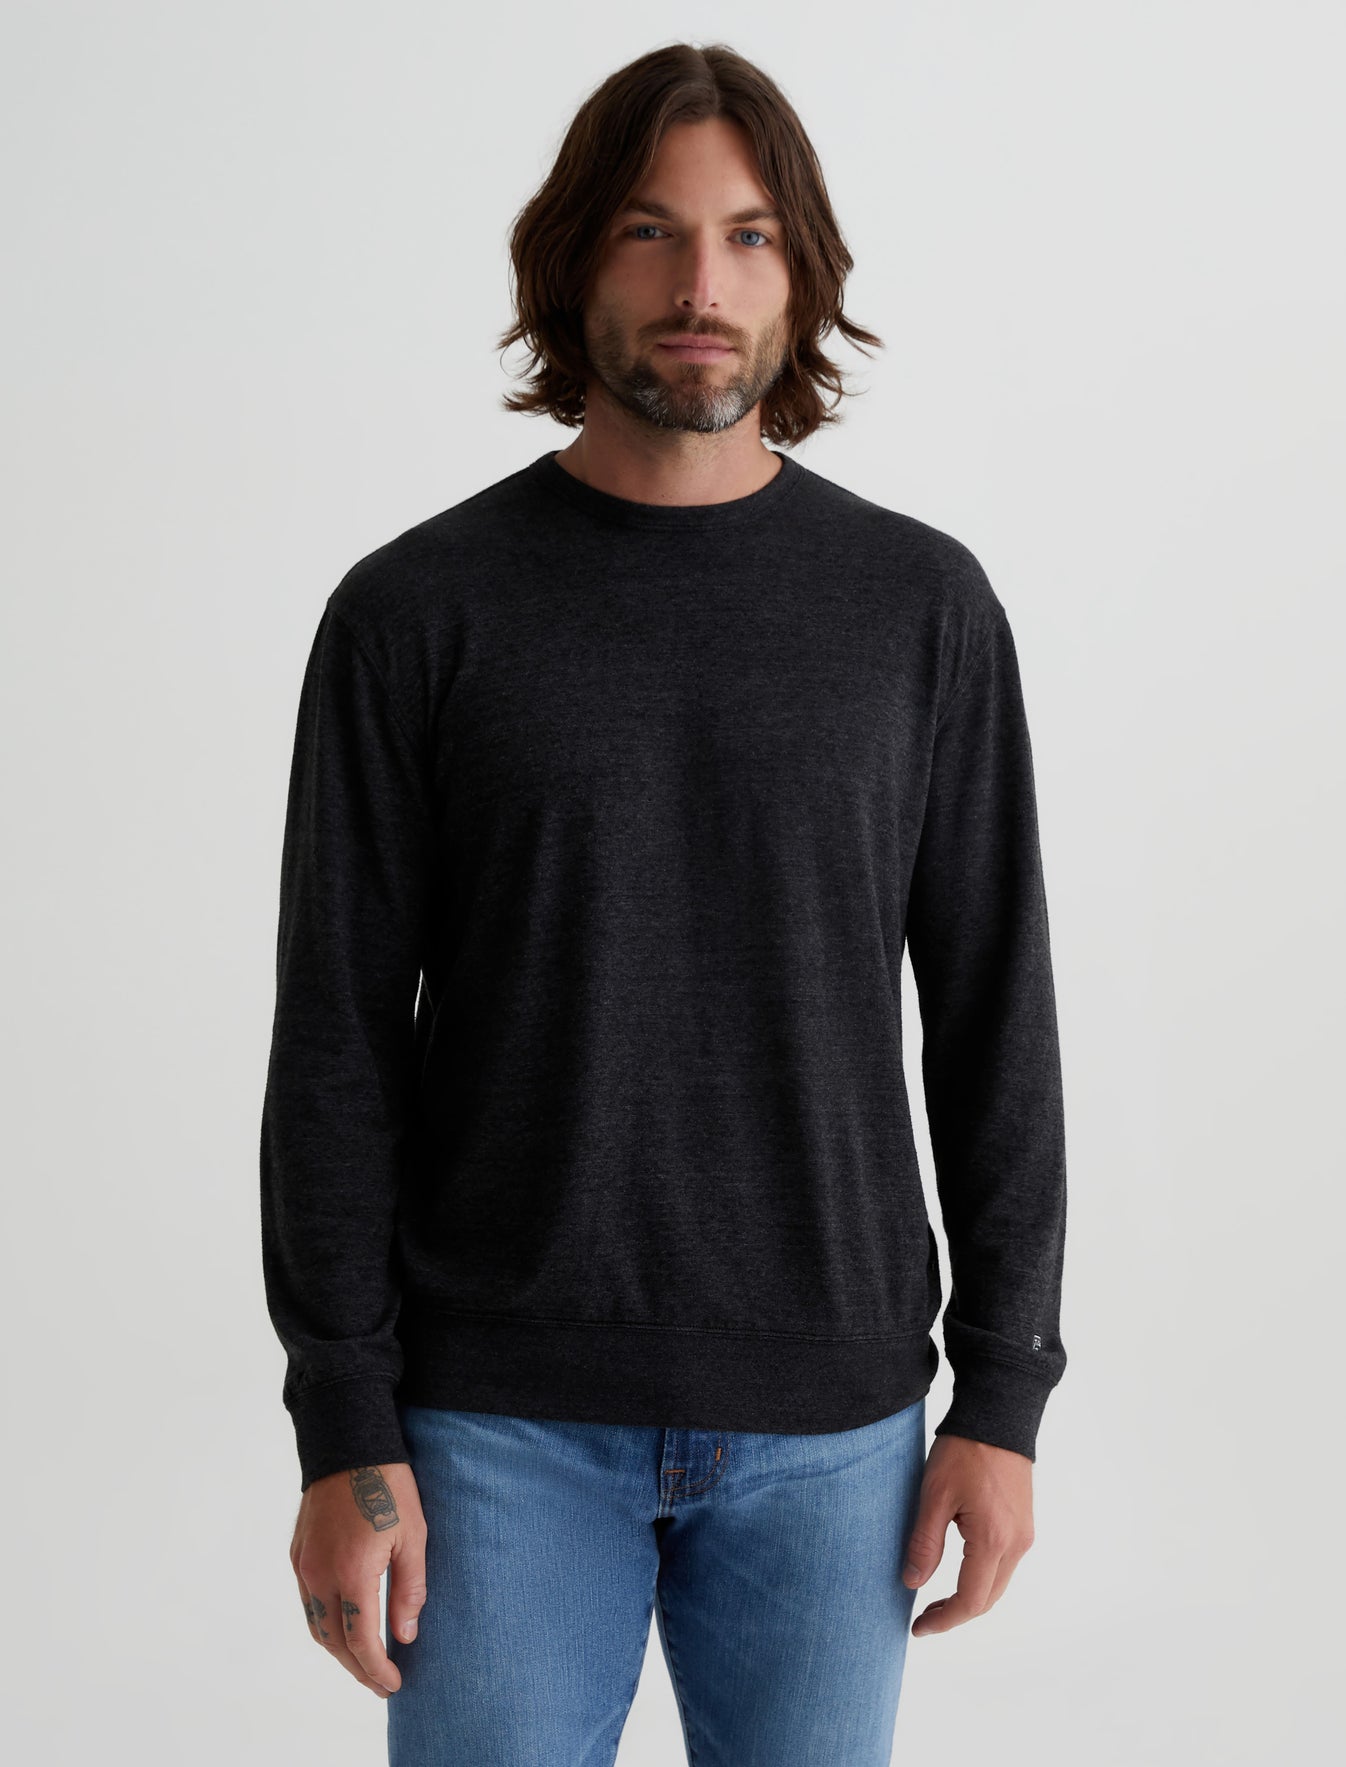 Wesley Pullover|Relaxed Crew Neck Pullover